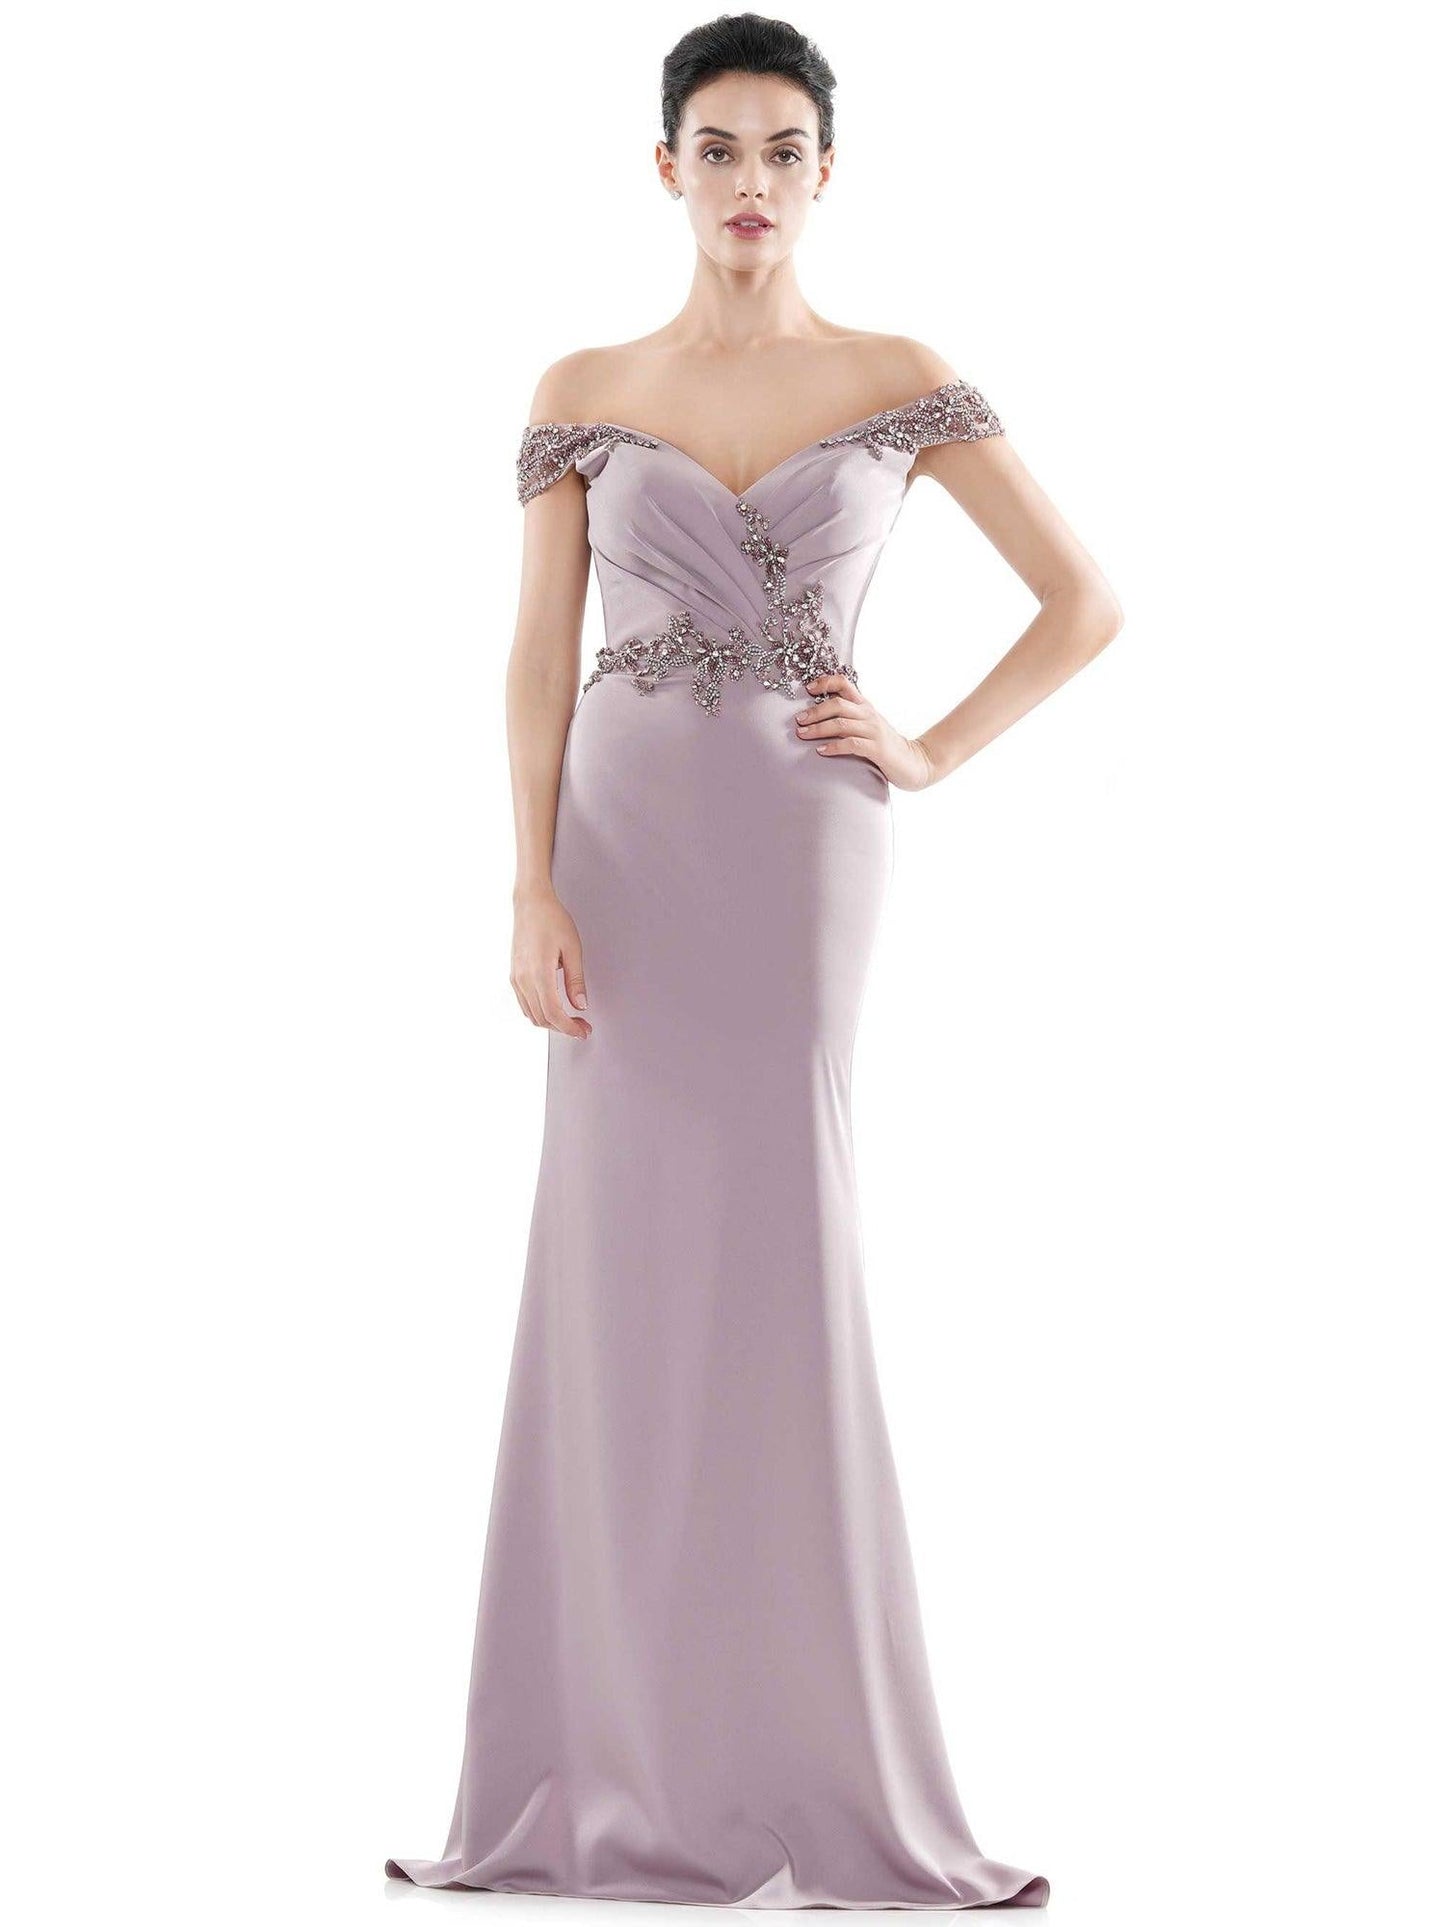 Marsoni Mother of the Bride Pleated Long Gown 1101 - The Dress Outlet